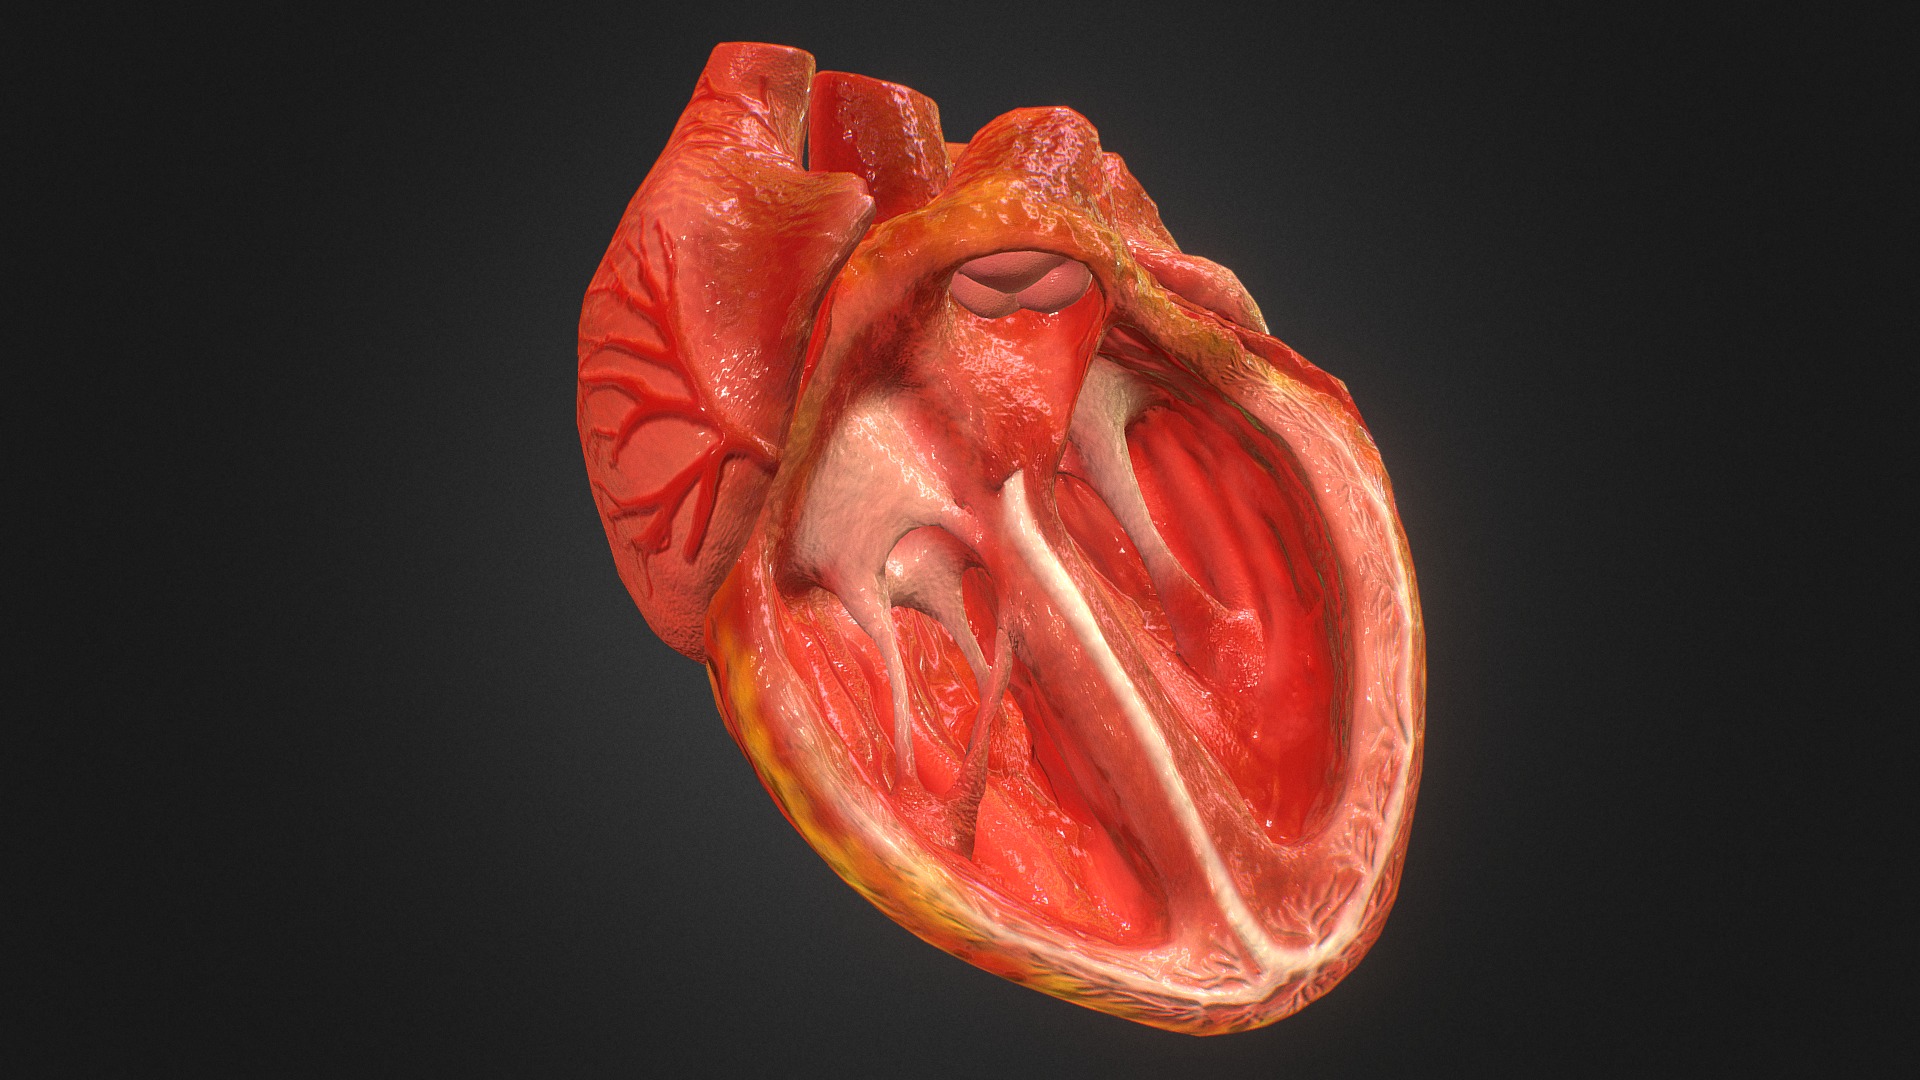 ### New in V2 - 4k Textures - Reduced and optimized polygon count (from 15k to 13k) - Added yellow colored fat, which was absent in previous model - Corrected the mitral valve which has only 2 valves IRL - Corrected the morphs for smoother animation ### Workflow - Sculpted a high poly version  - Zremesher  - Bake  - 25 Morphs - Animate  - Sketchfab  ###Screenshots      - 3d Animated Realistic Human Heart - V2.0 - Buy Royalty Free 3D model by Anatomy by Doctor Jana (@docjana) 3d model